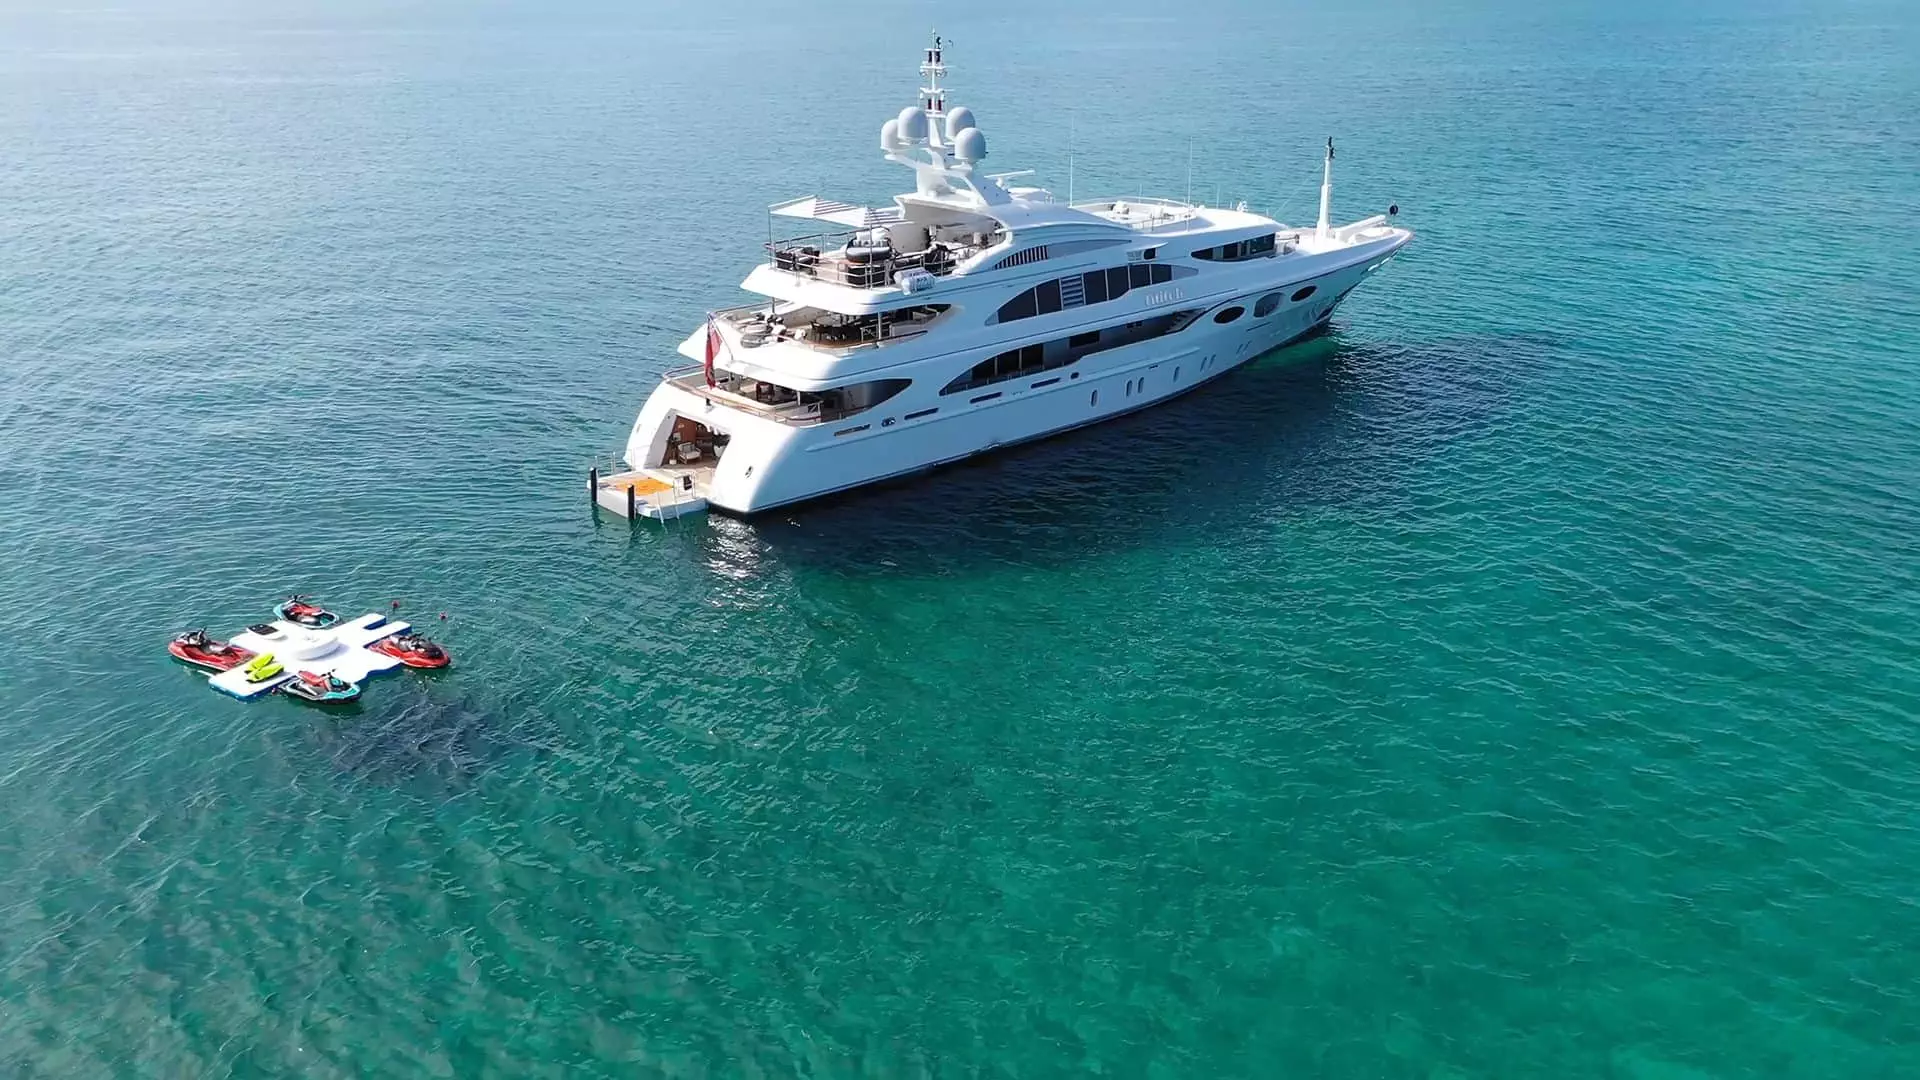 Superyacht Lattitude and her FunAir inflatable Toy Island